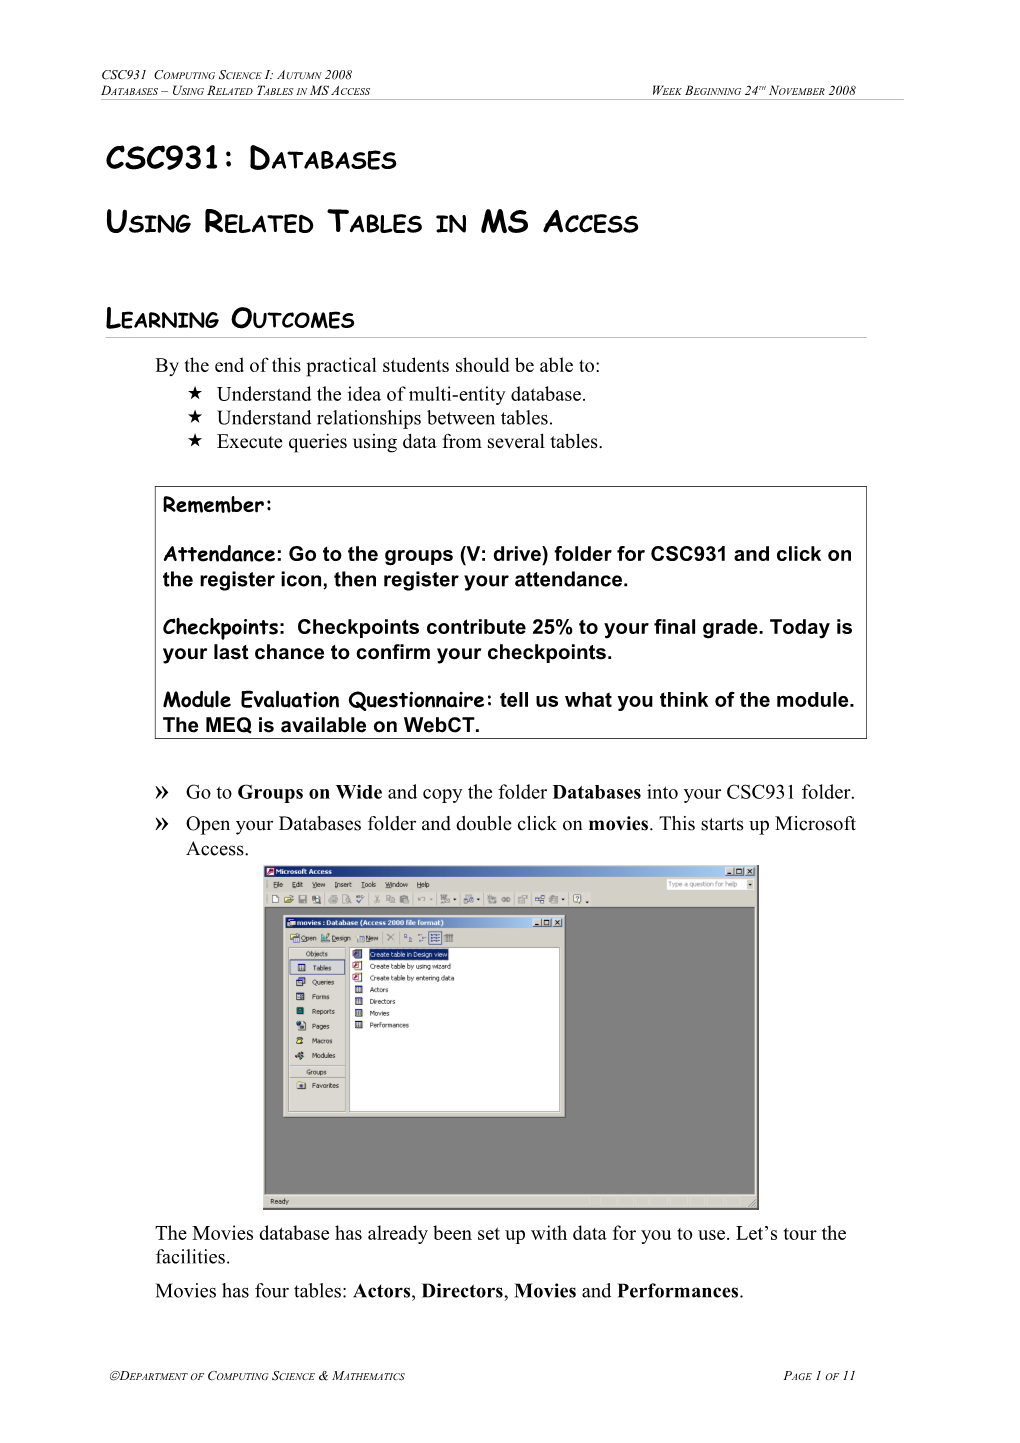 Using Related Tables in MS Access